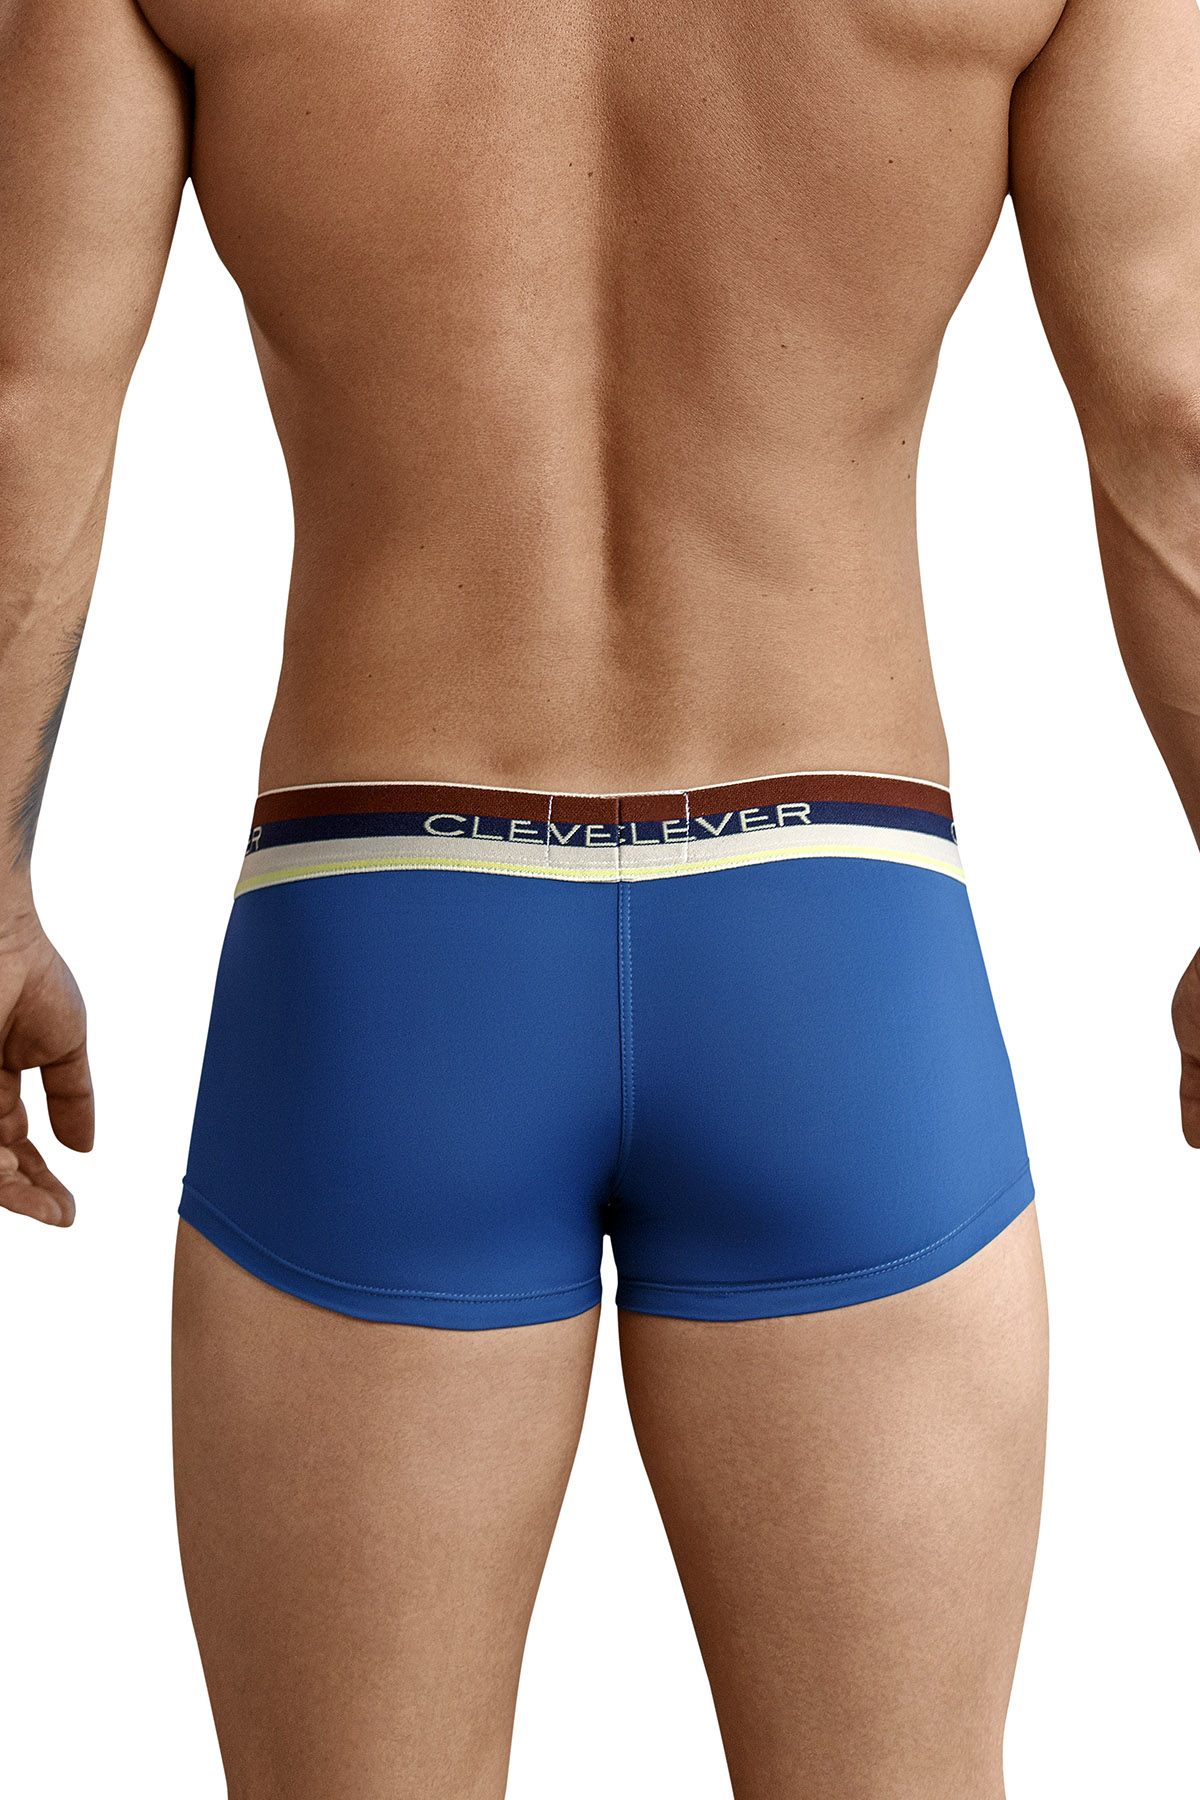 Clever Dark Teal Cambodian Latin Trunk